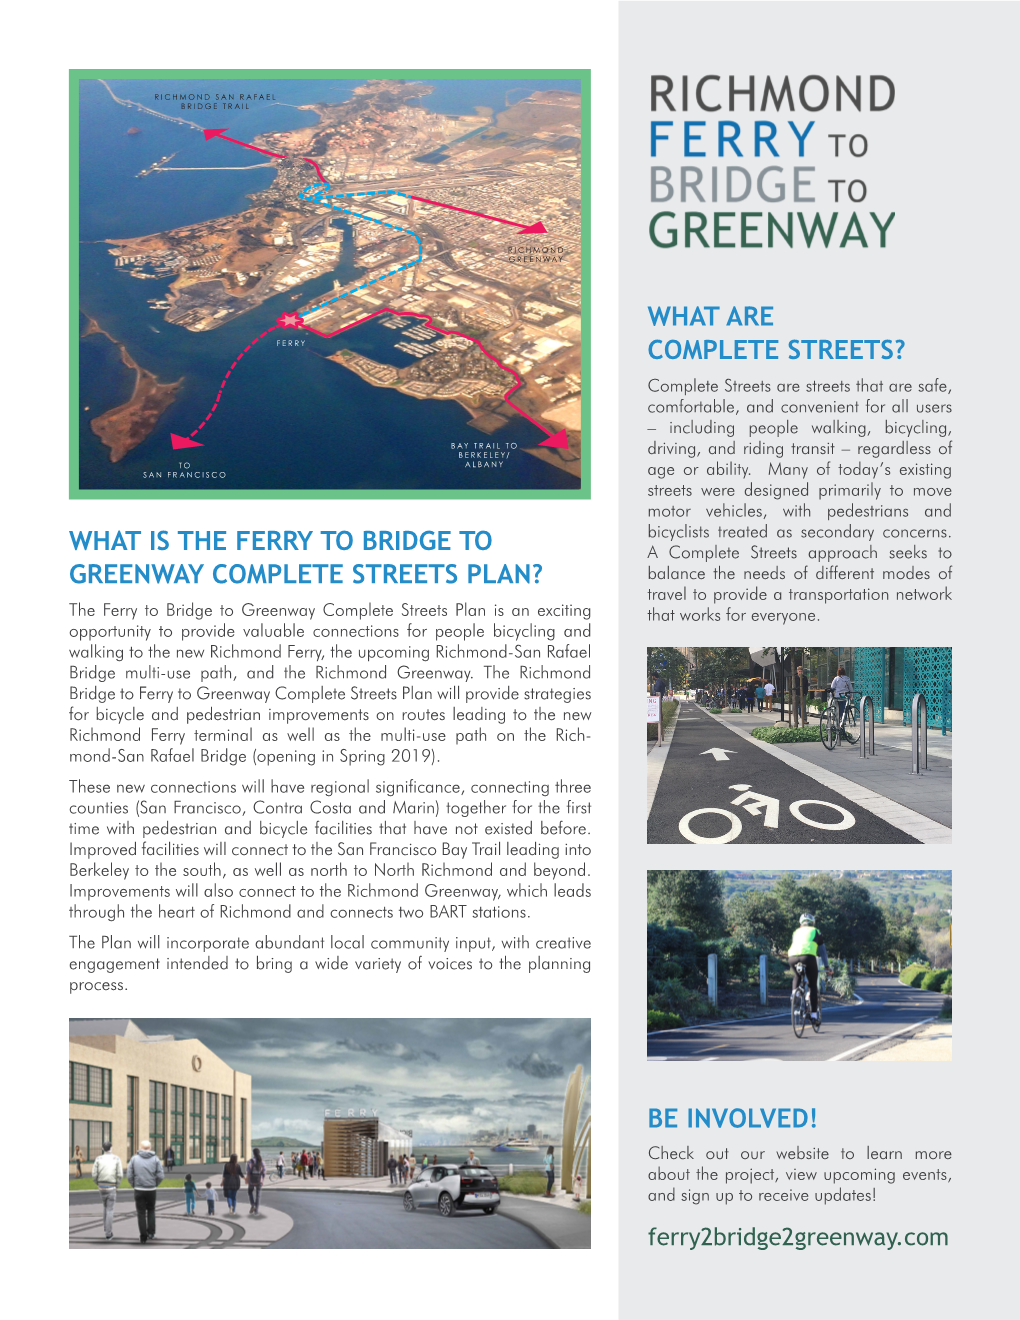 What Is the Ferry to Bridge to Greenway Complete